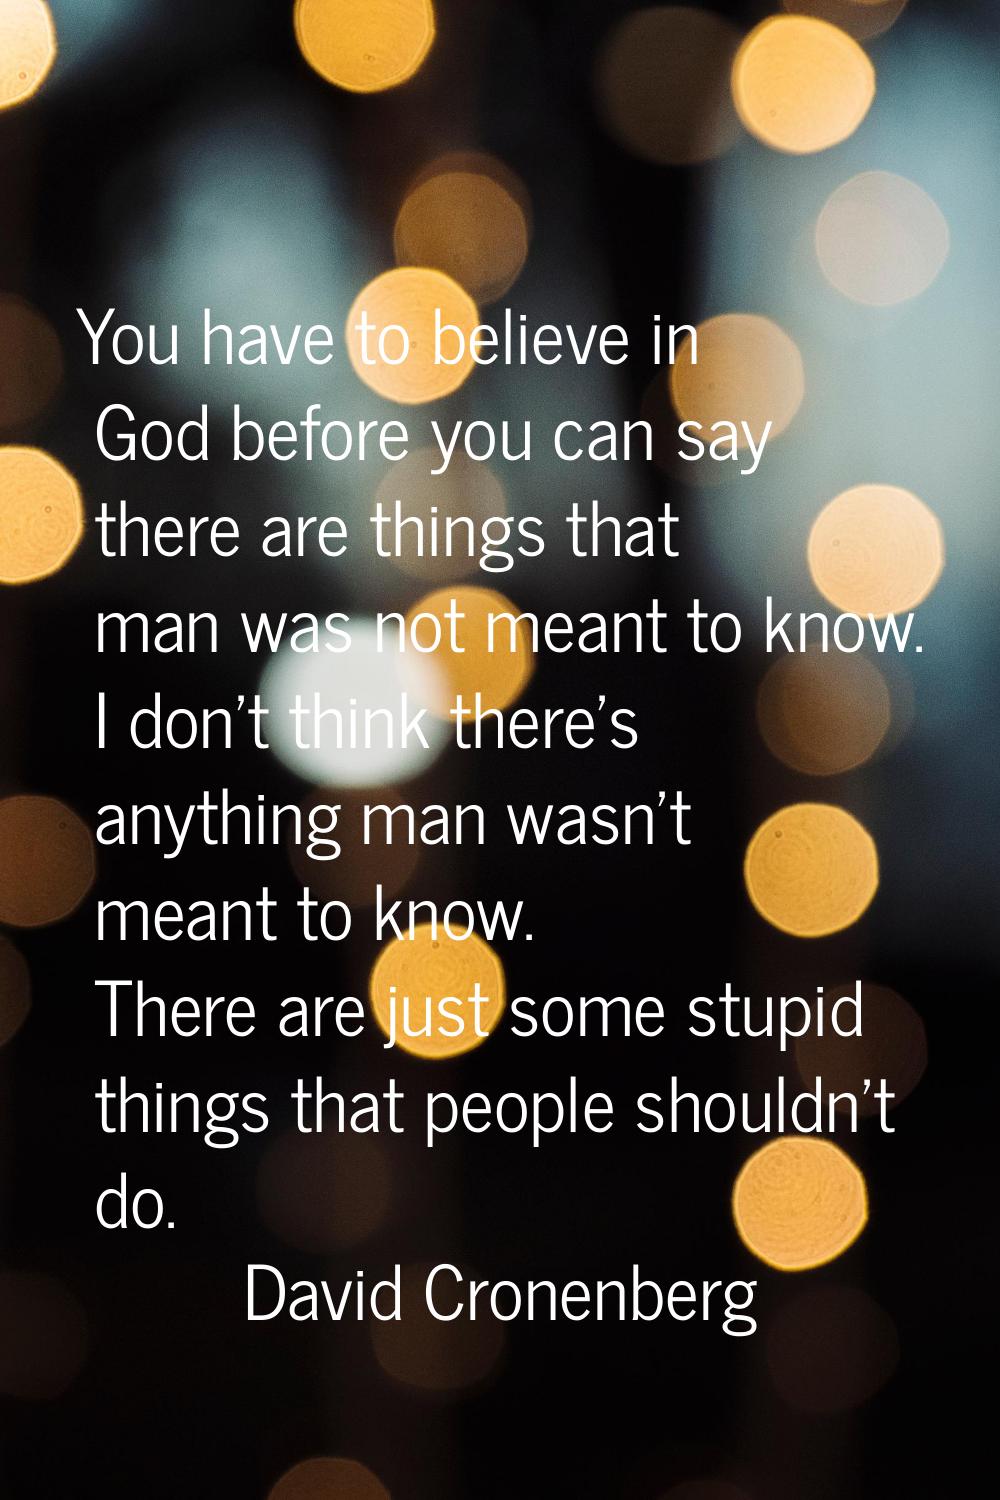 You have to believe in God before you can say there are things that man was not meant to know. I do